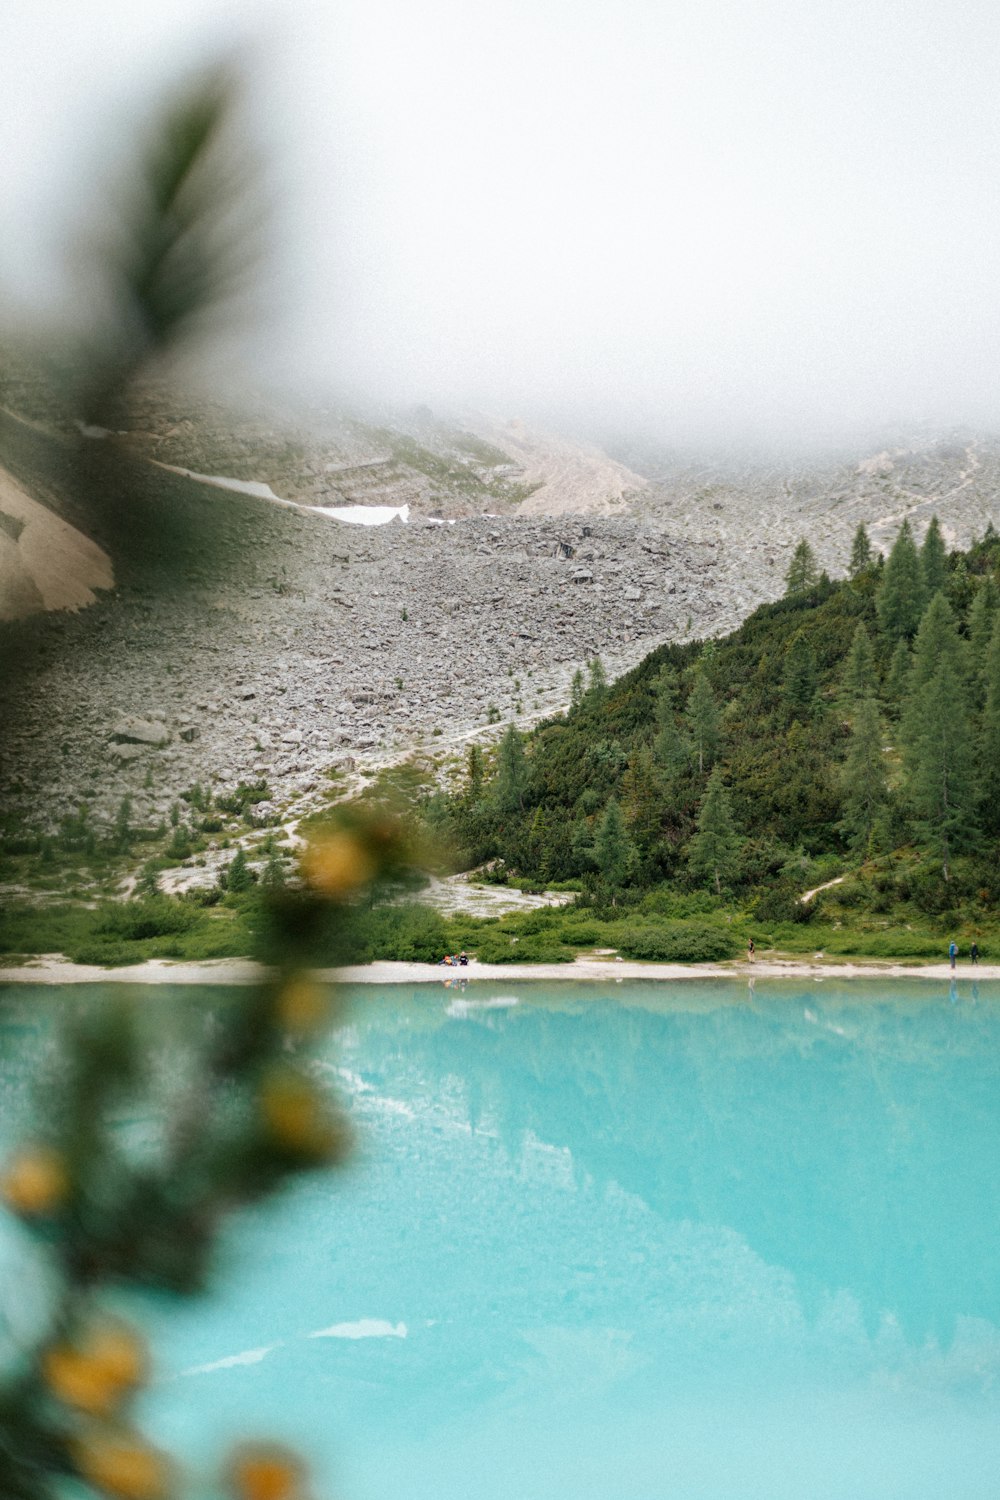 a blue pool surrounded by mountains and trees